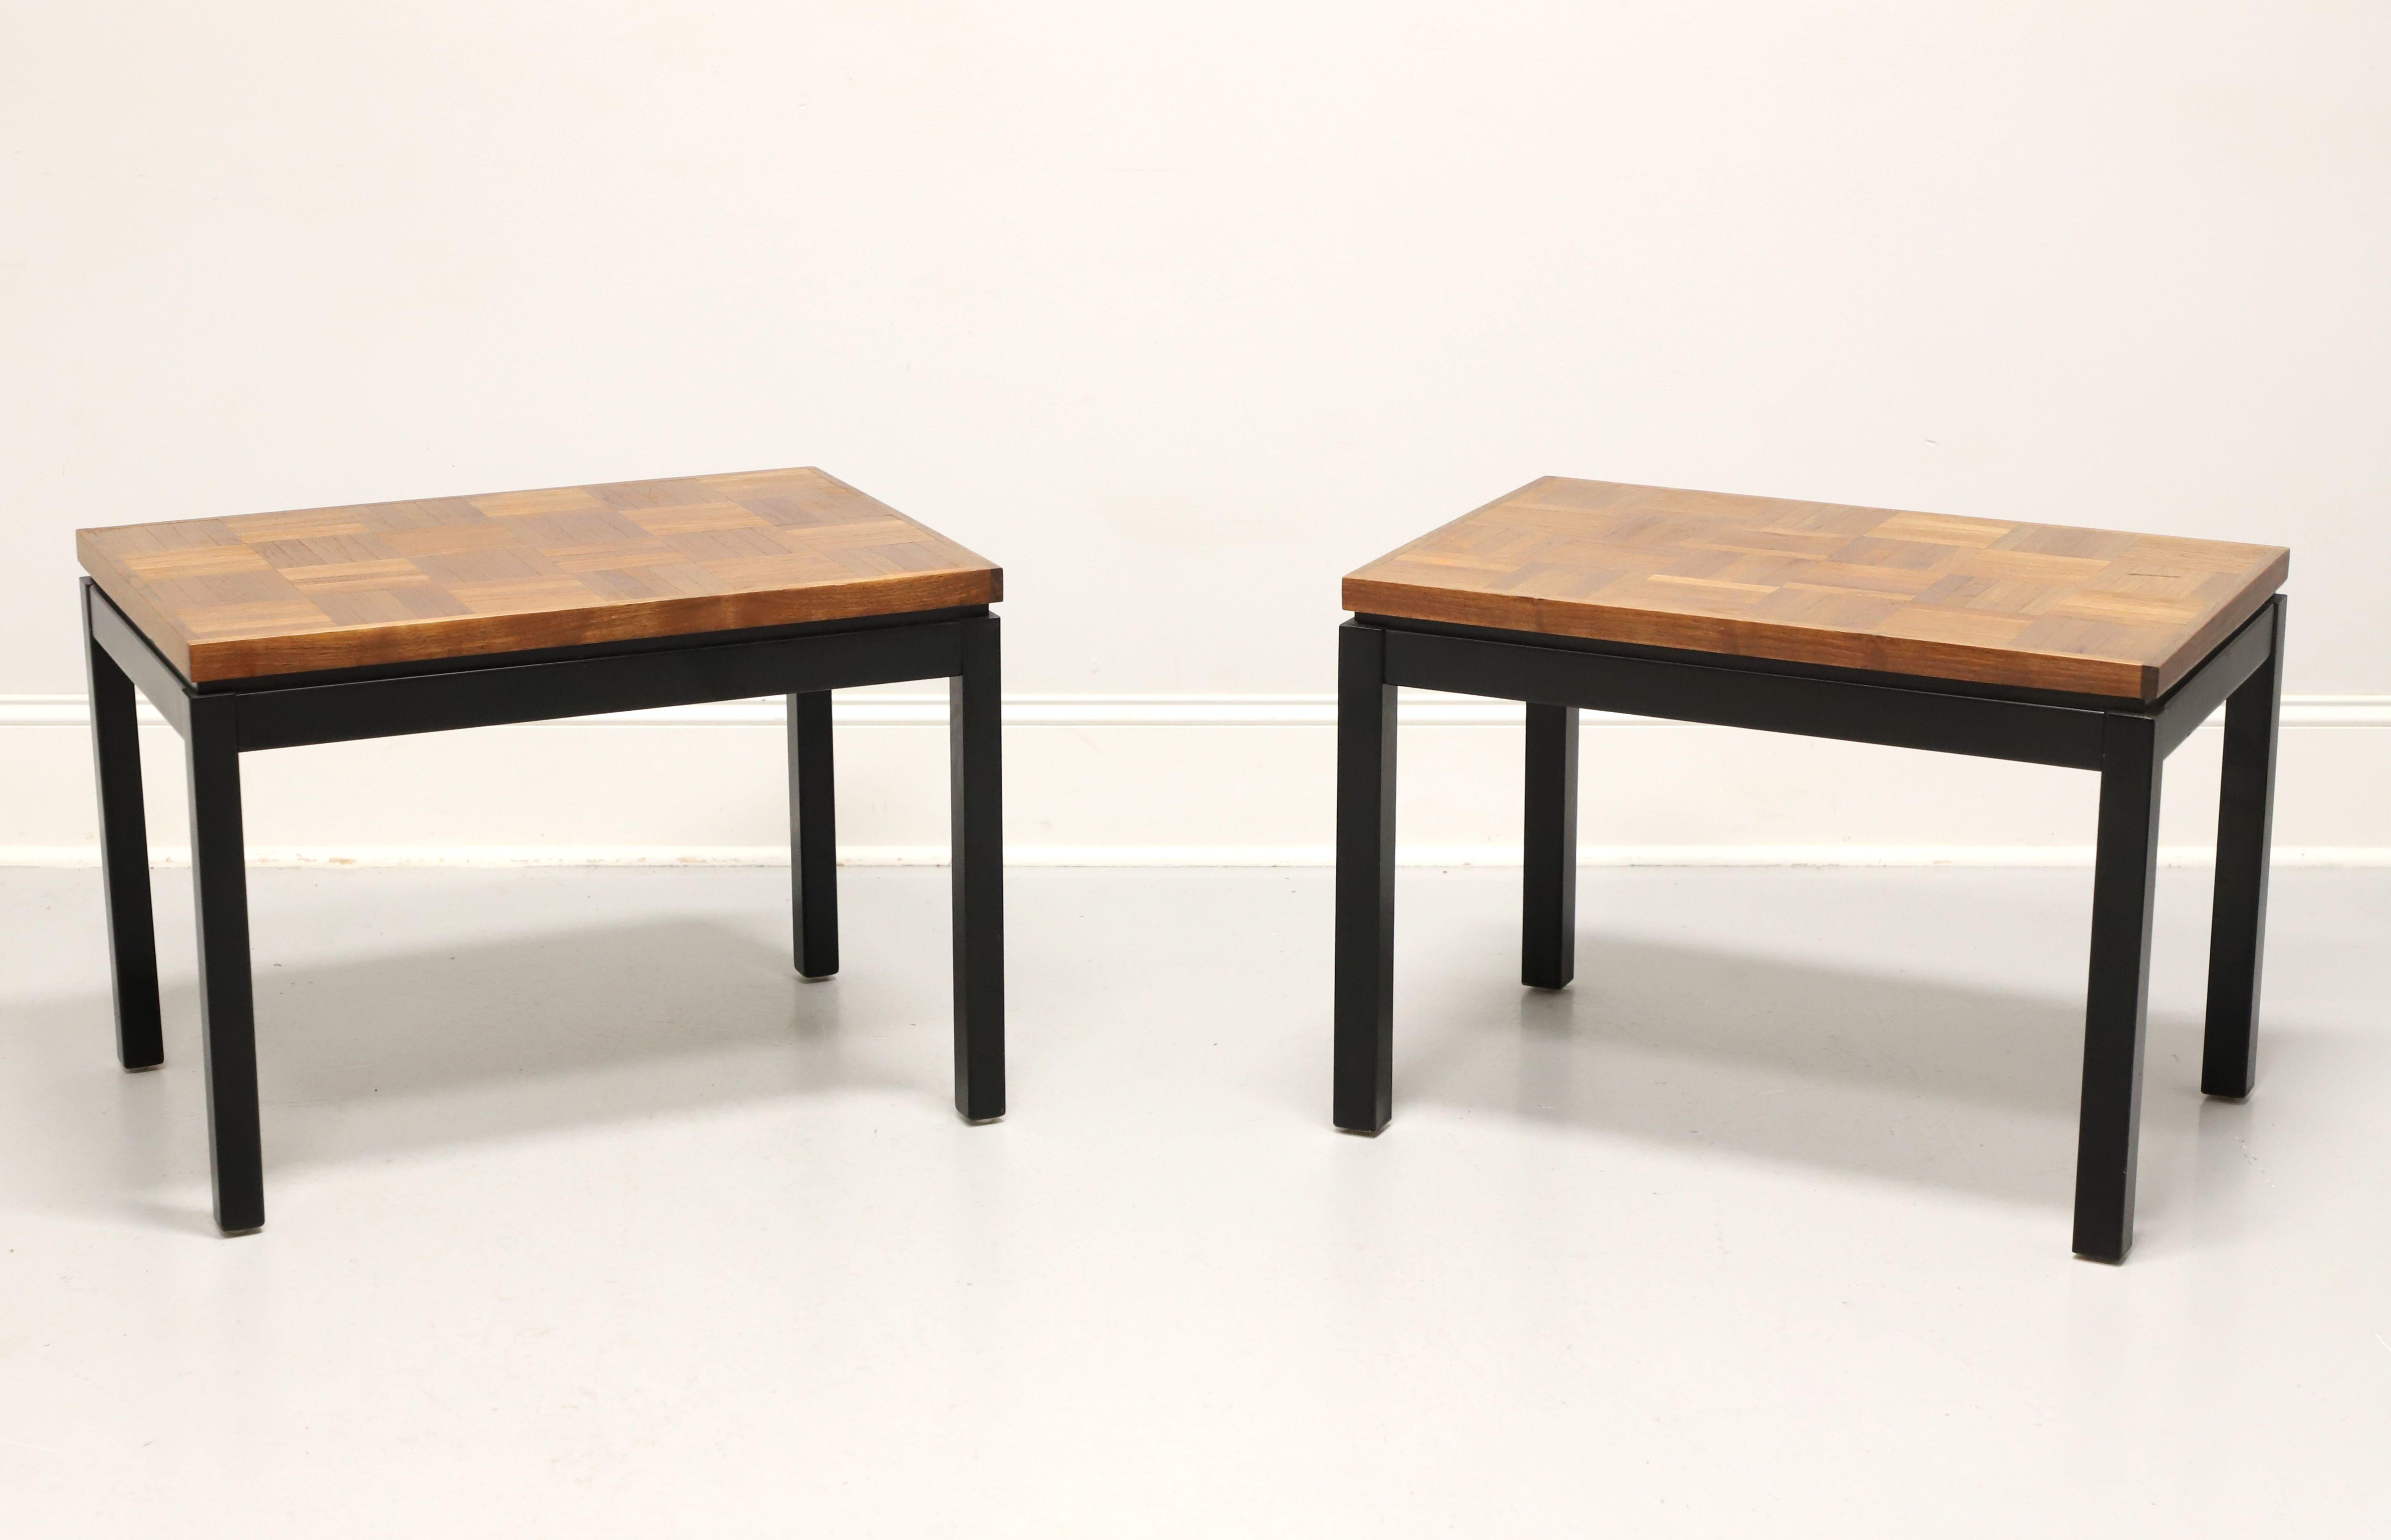 A pair of Modern style side tables, unbranded, similar quality to Drexel Heritage. Pecan, or similar nutwood, parquet design to the squared edge top, black lacquered apron and square straight legs. Likely made in the USA, in the late 20th